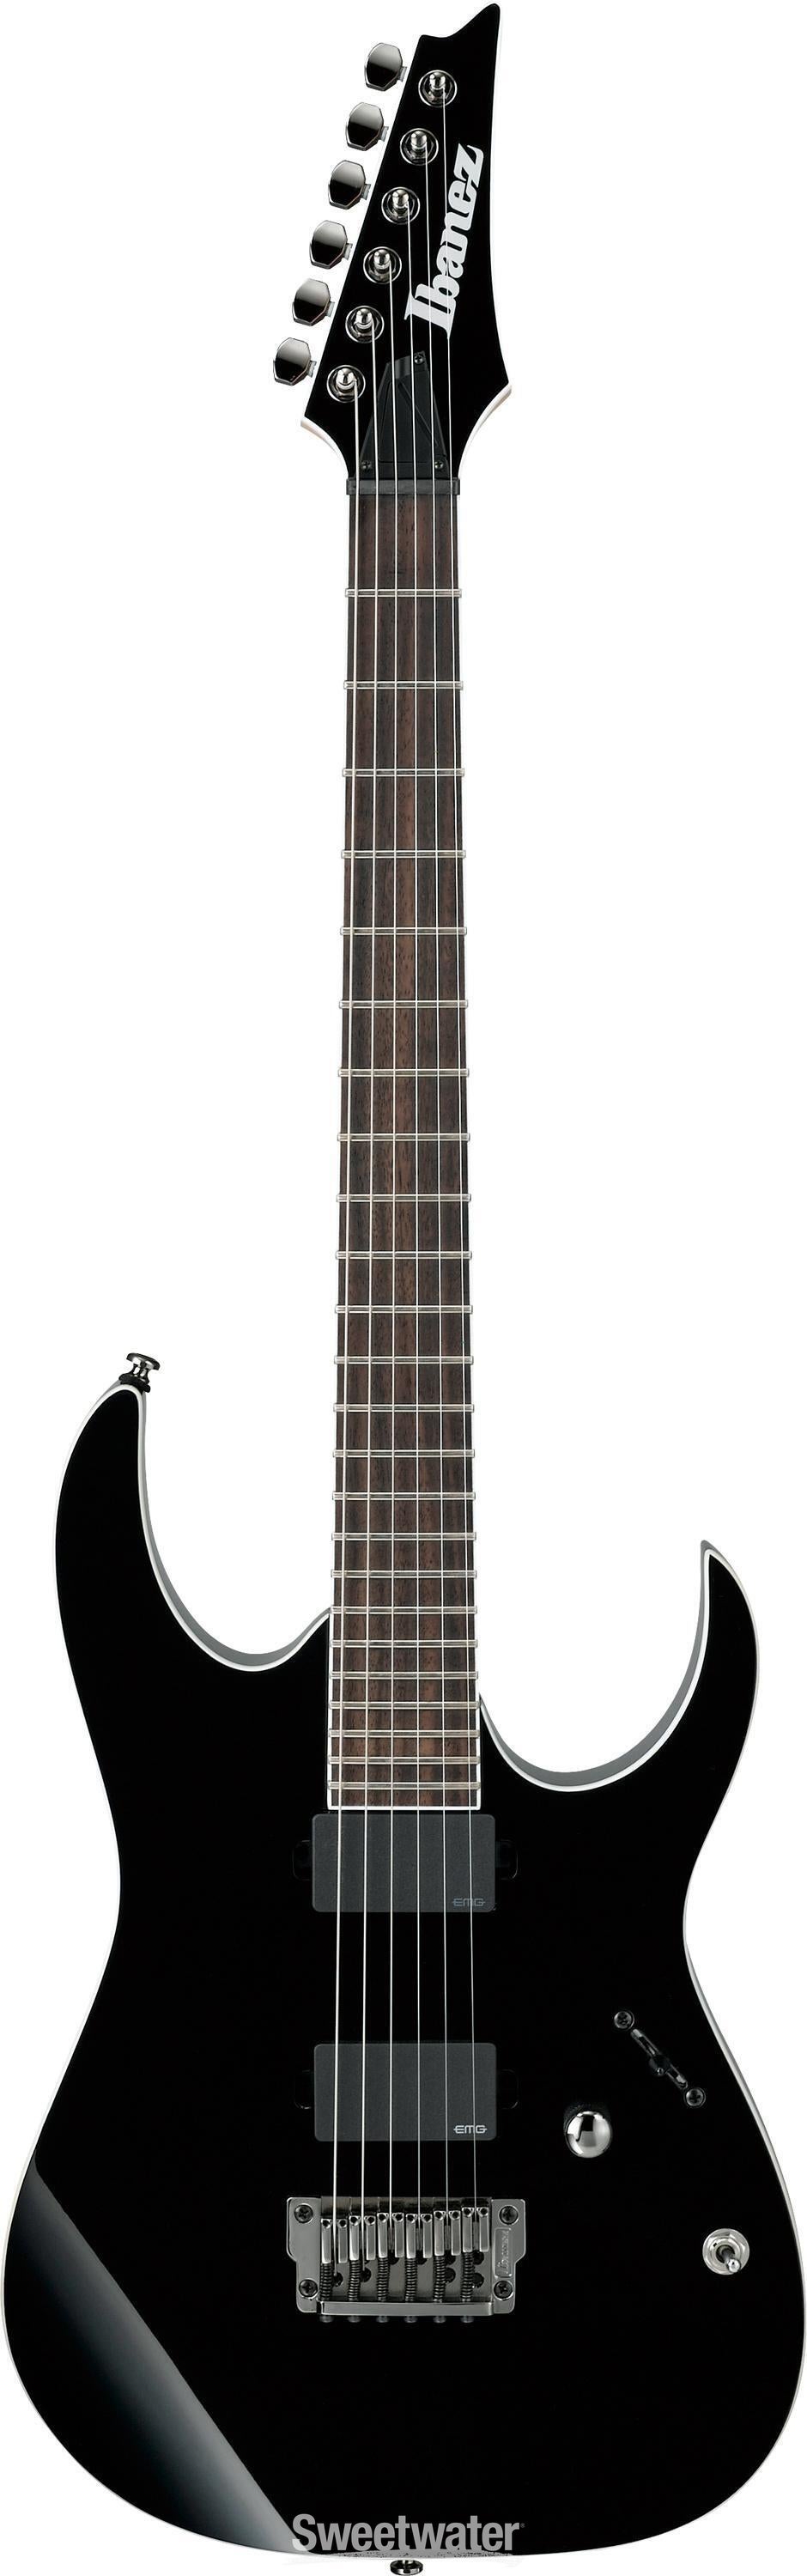 Ibanez Iron Label RGIR20FE - Black | Sweetwater